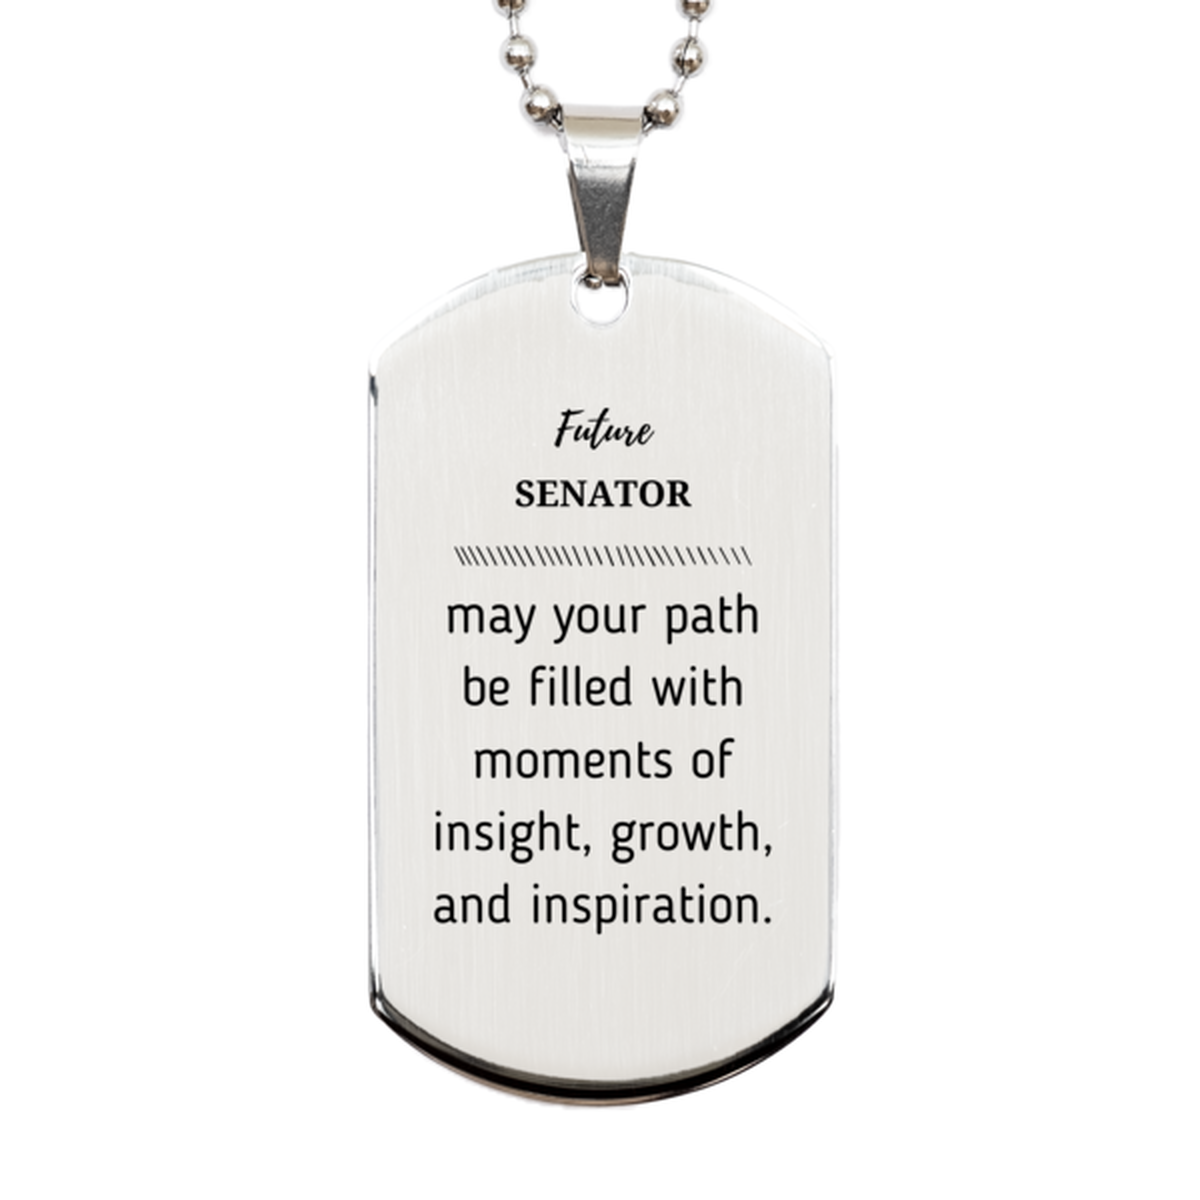 Future Senator Gifts, May your path be filled with moments of insight, Graduation Gifts for New Senator, Christmas Unique Silver Dog Tag For Men, Women, Friends